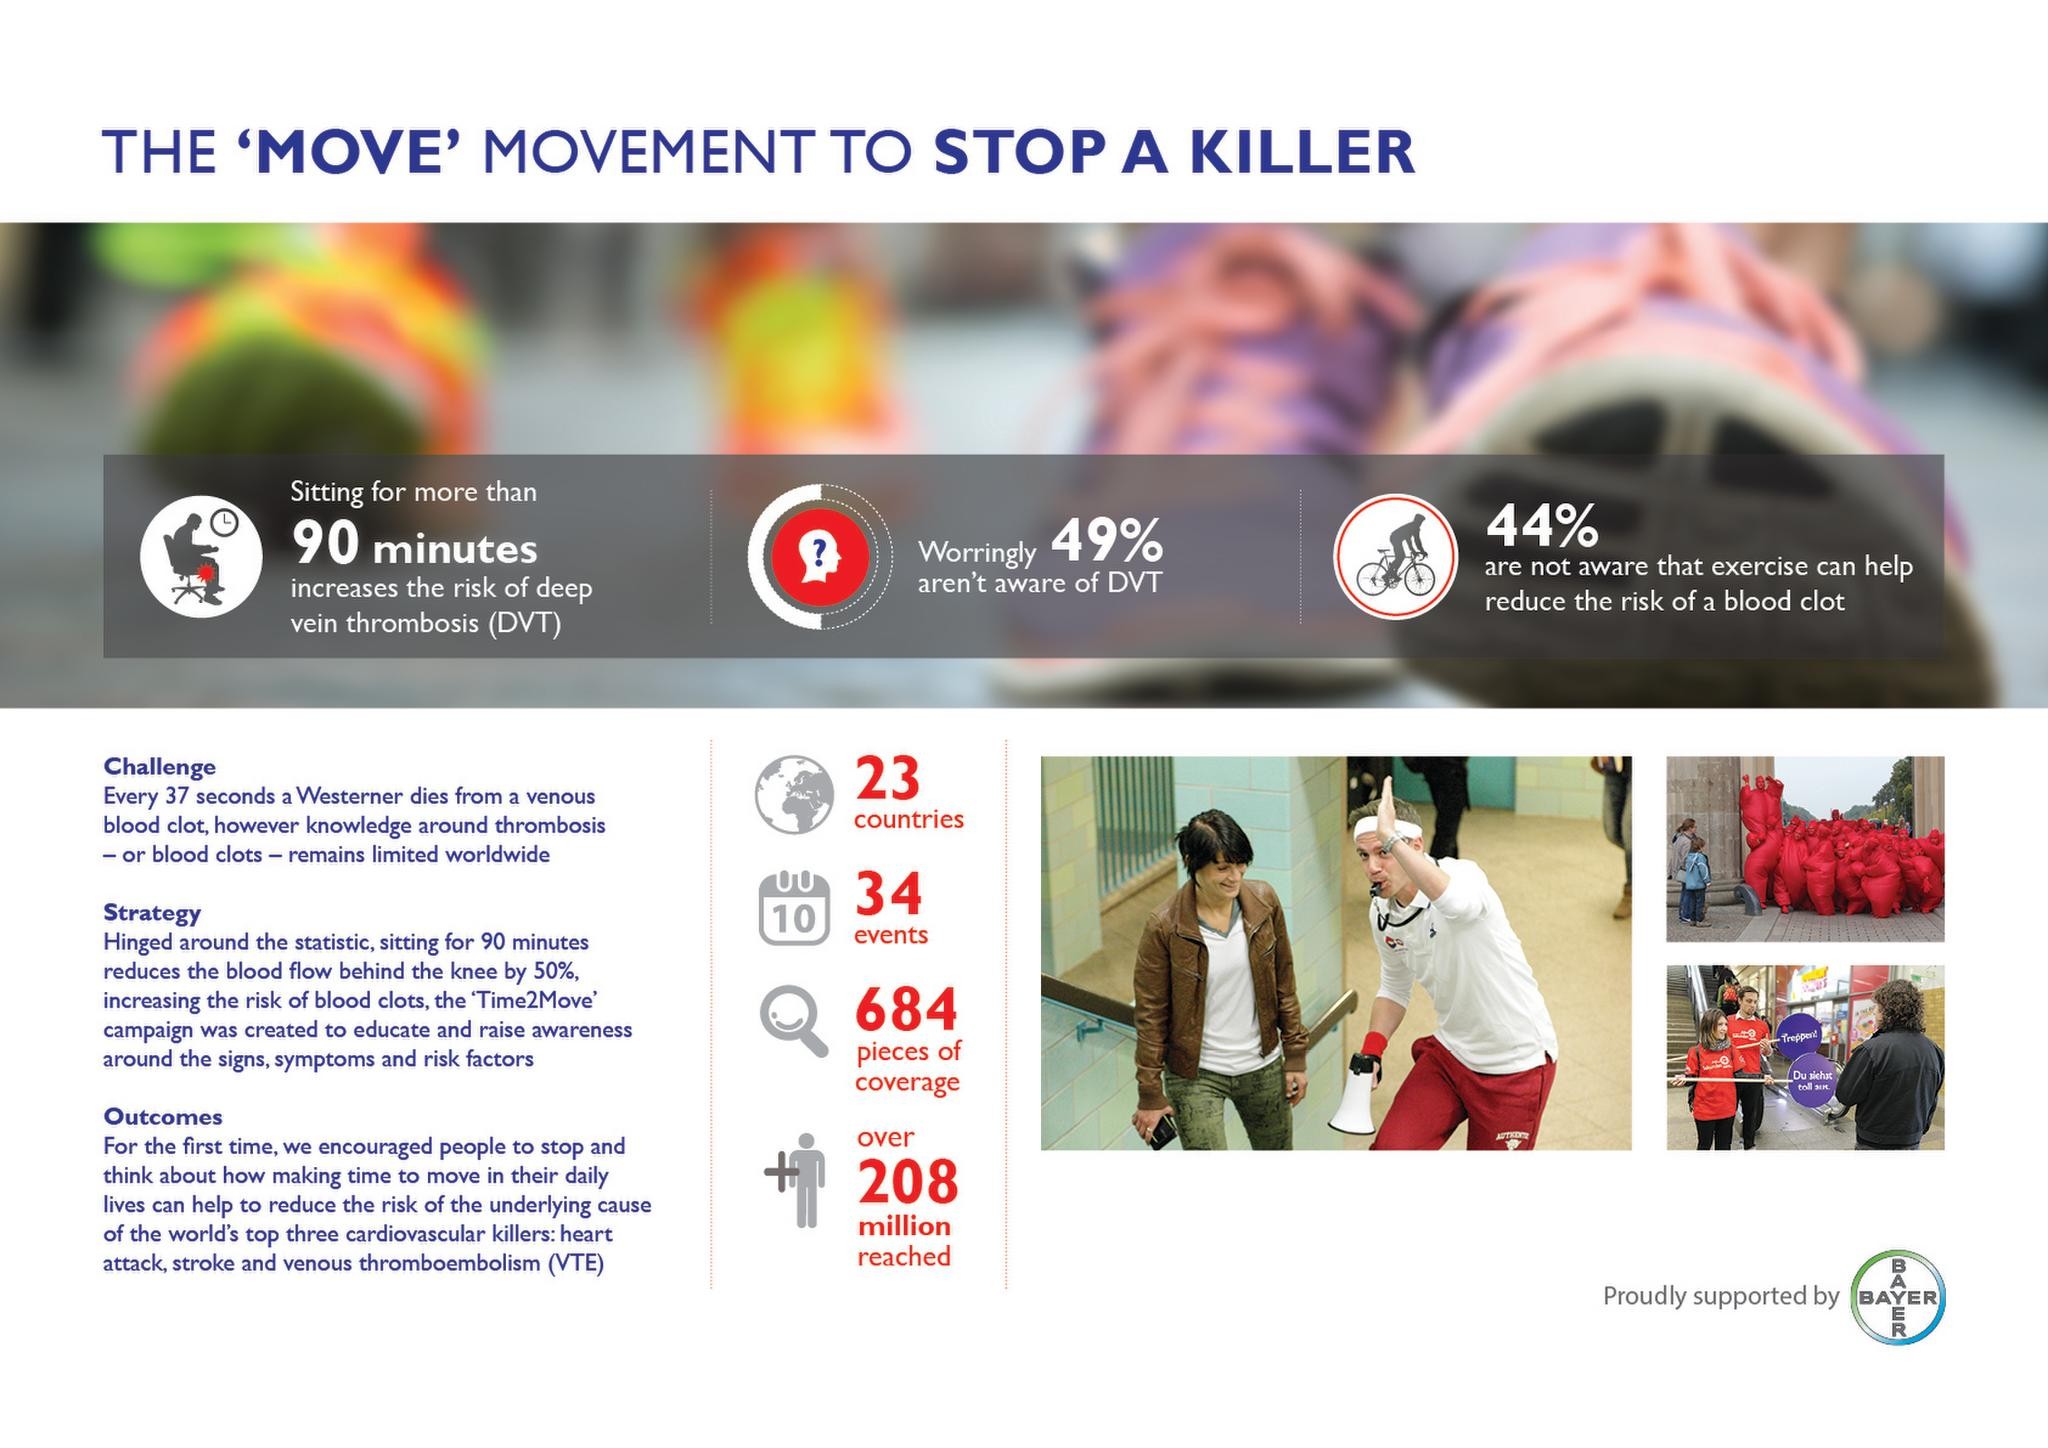 THE ‘MOVE’ MOVEMENT TO STOP A KILLER